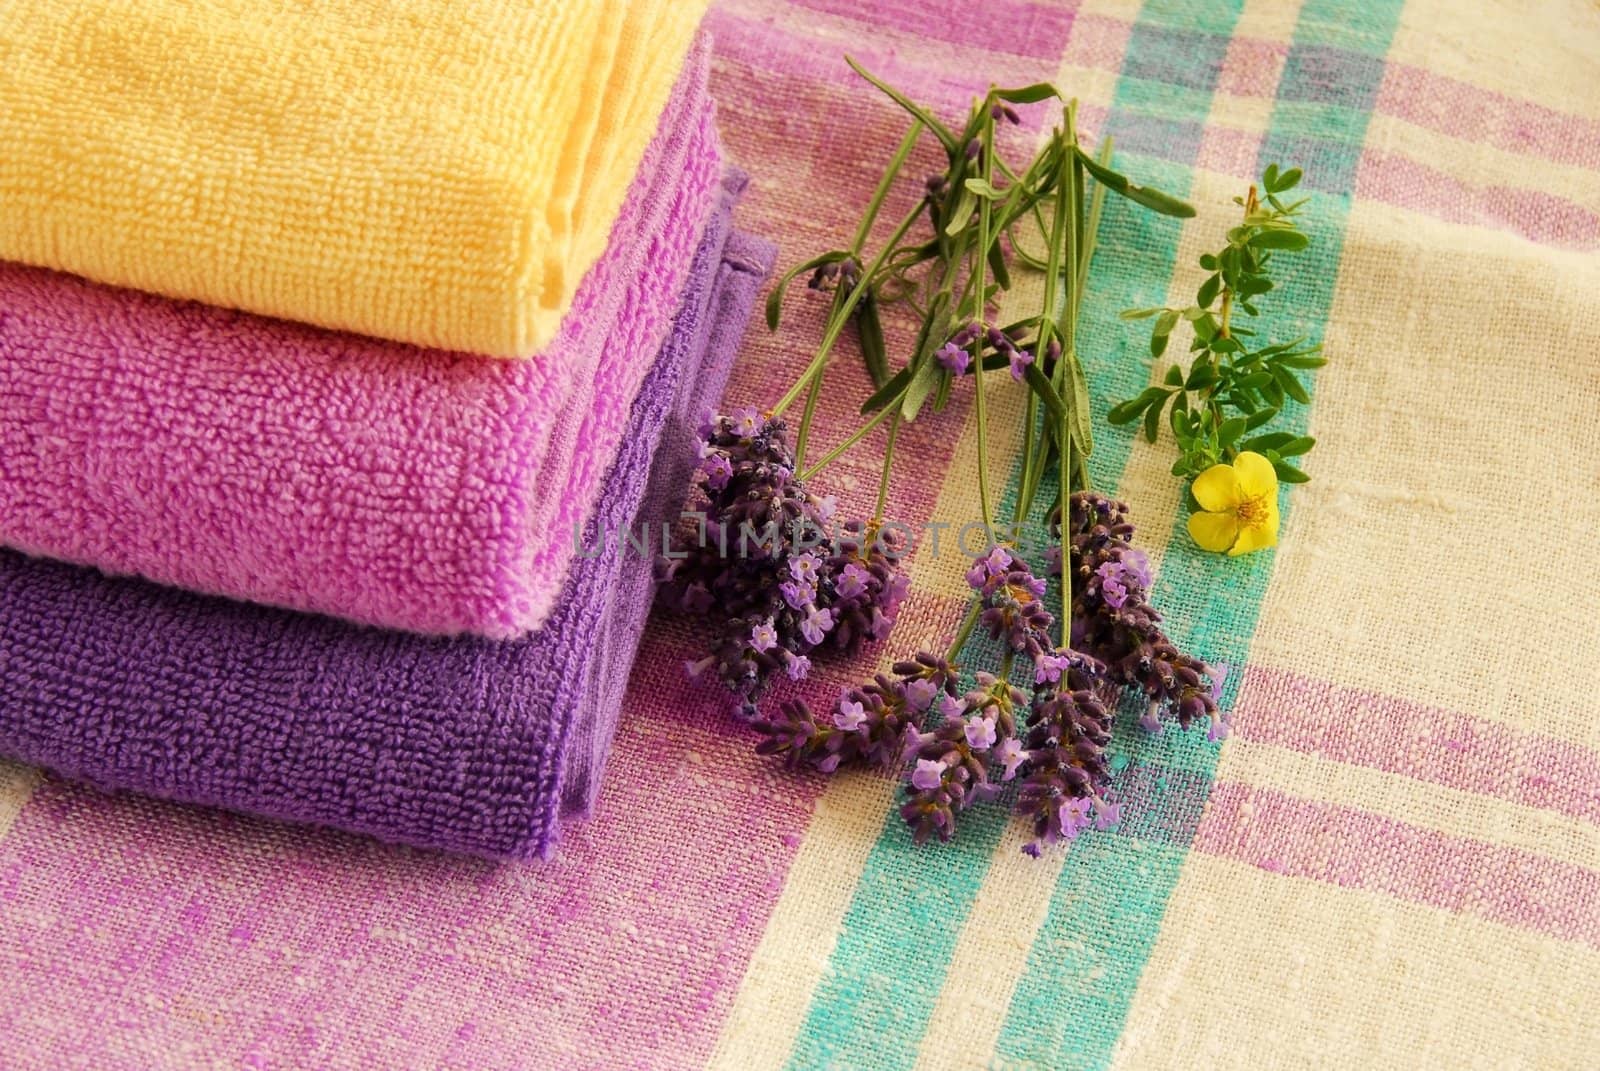 magenta, purple and yellow towels stack with lavender flowers